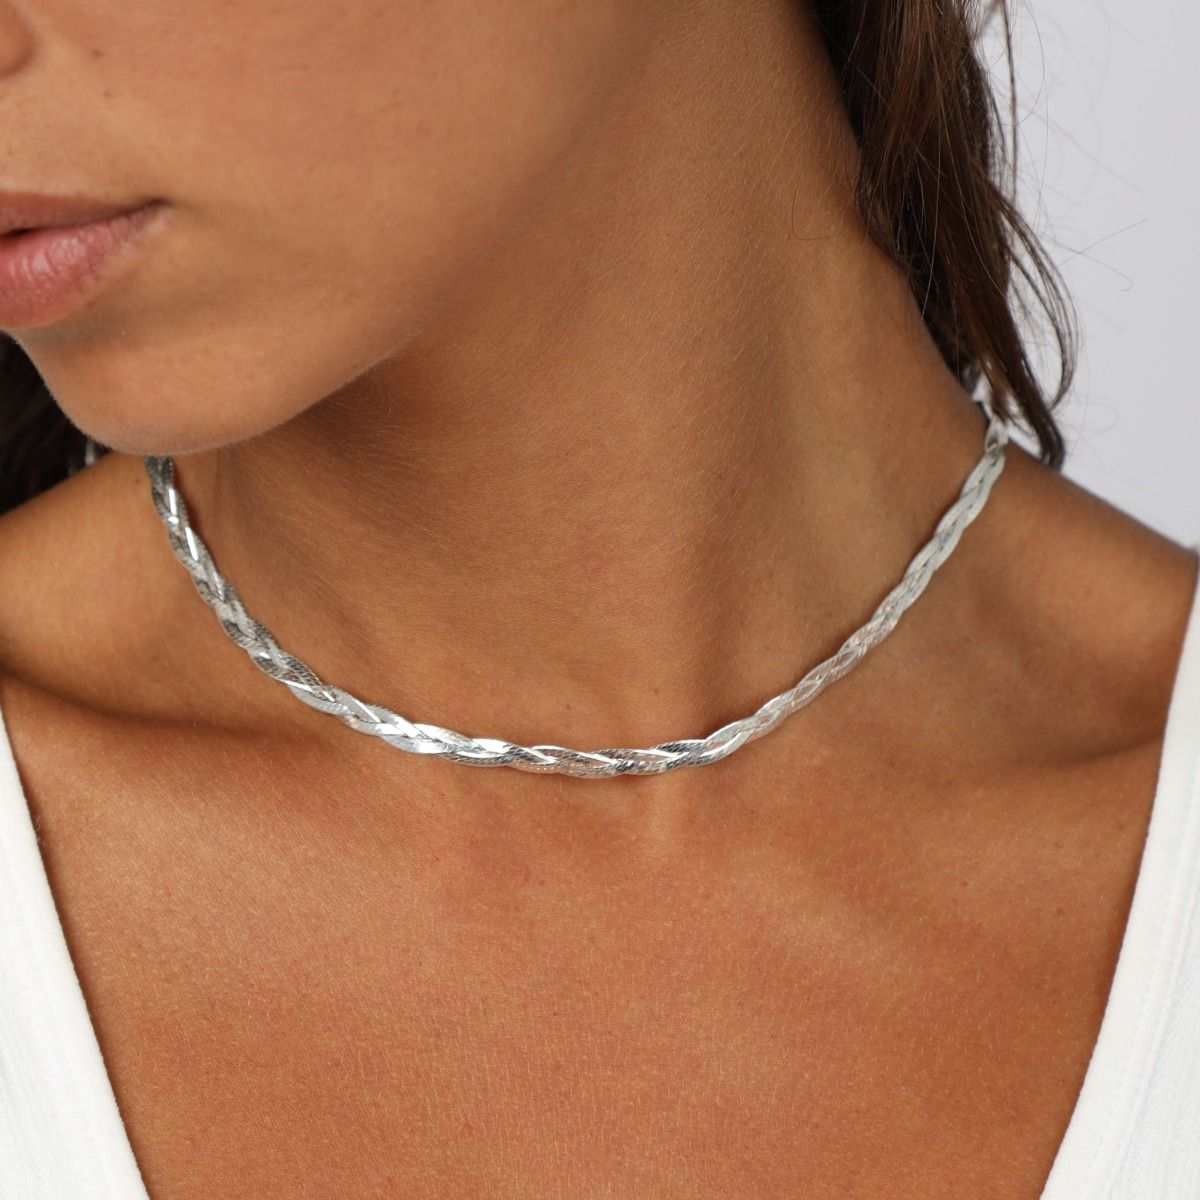 Italy Solid 925 Sterling Silver Herringbone Necklace Silver Flat Snake Chain  | eBay